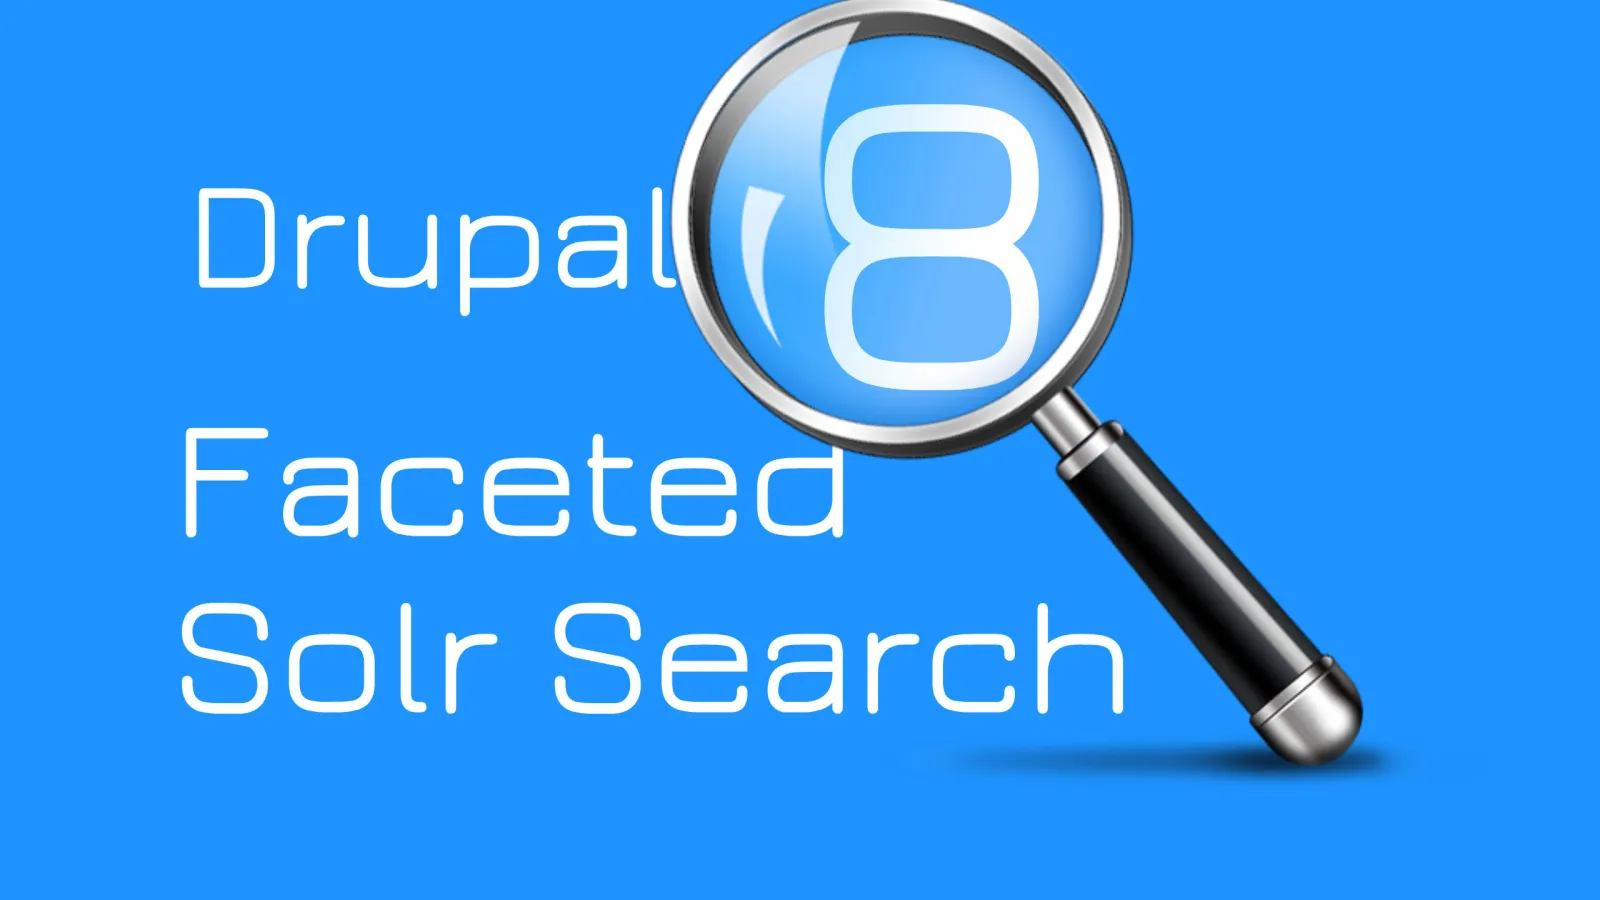 Implement Faceted search with Solr in Drupal 8?